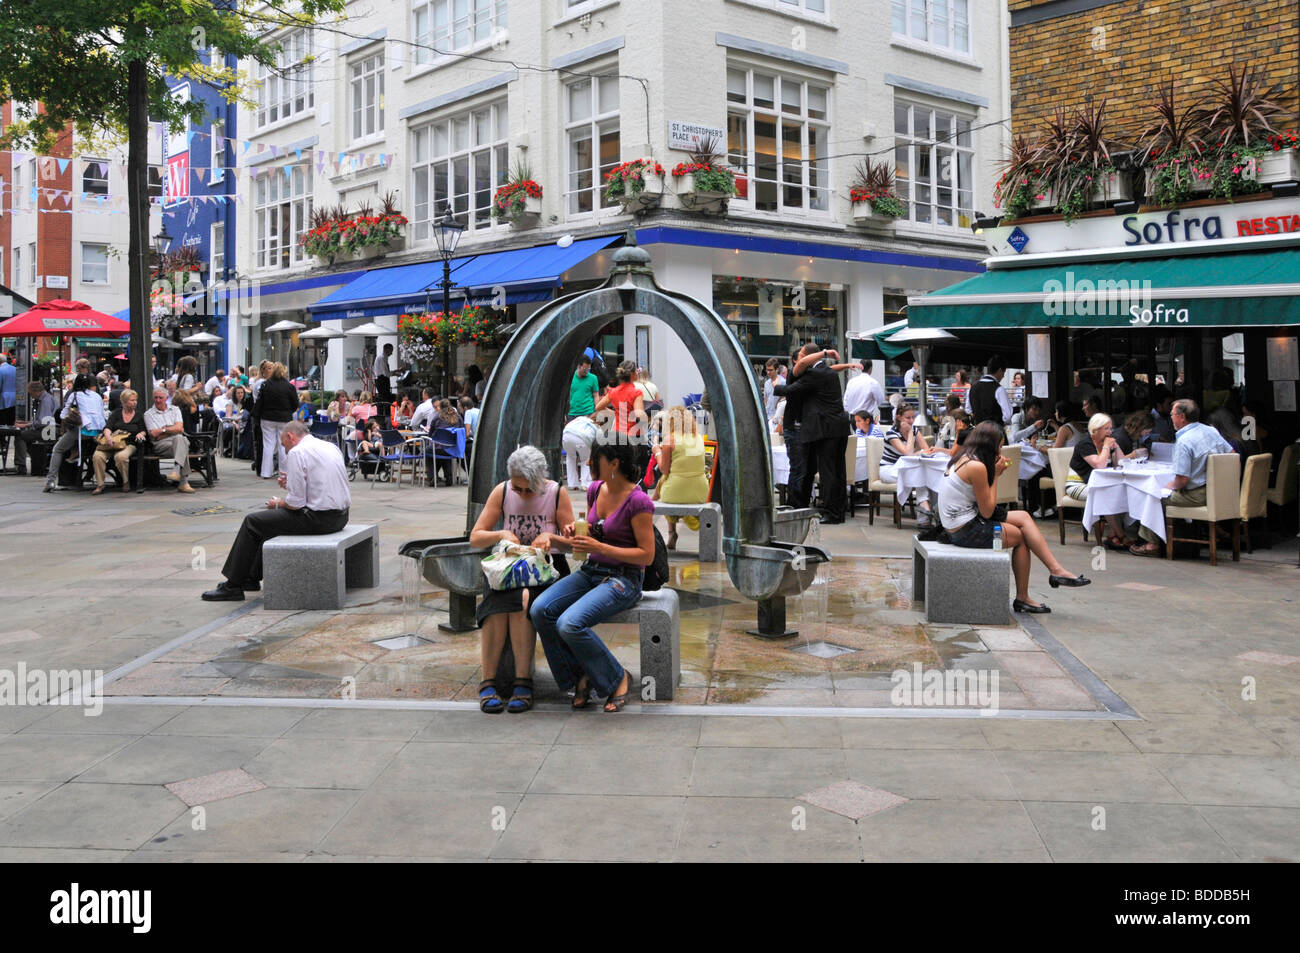 Pavement cafe bars & restaurants in West End London at St Christophers Place just off Oxford Street with water feature fountain Stock Photo